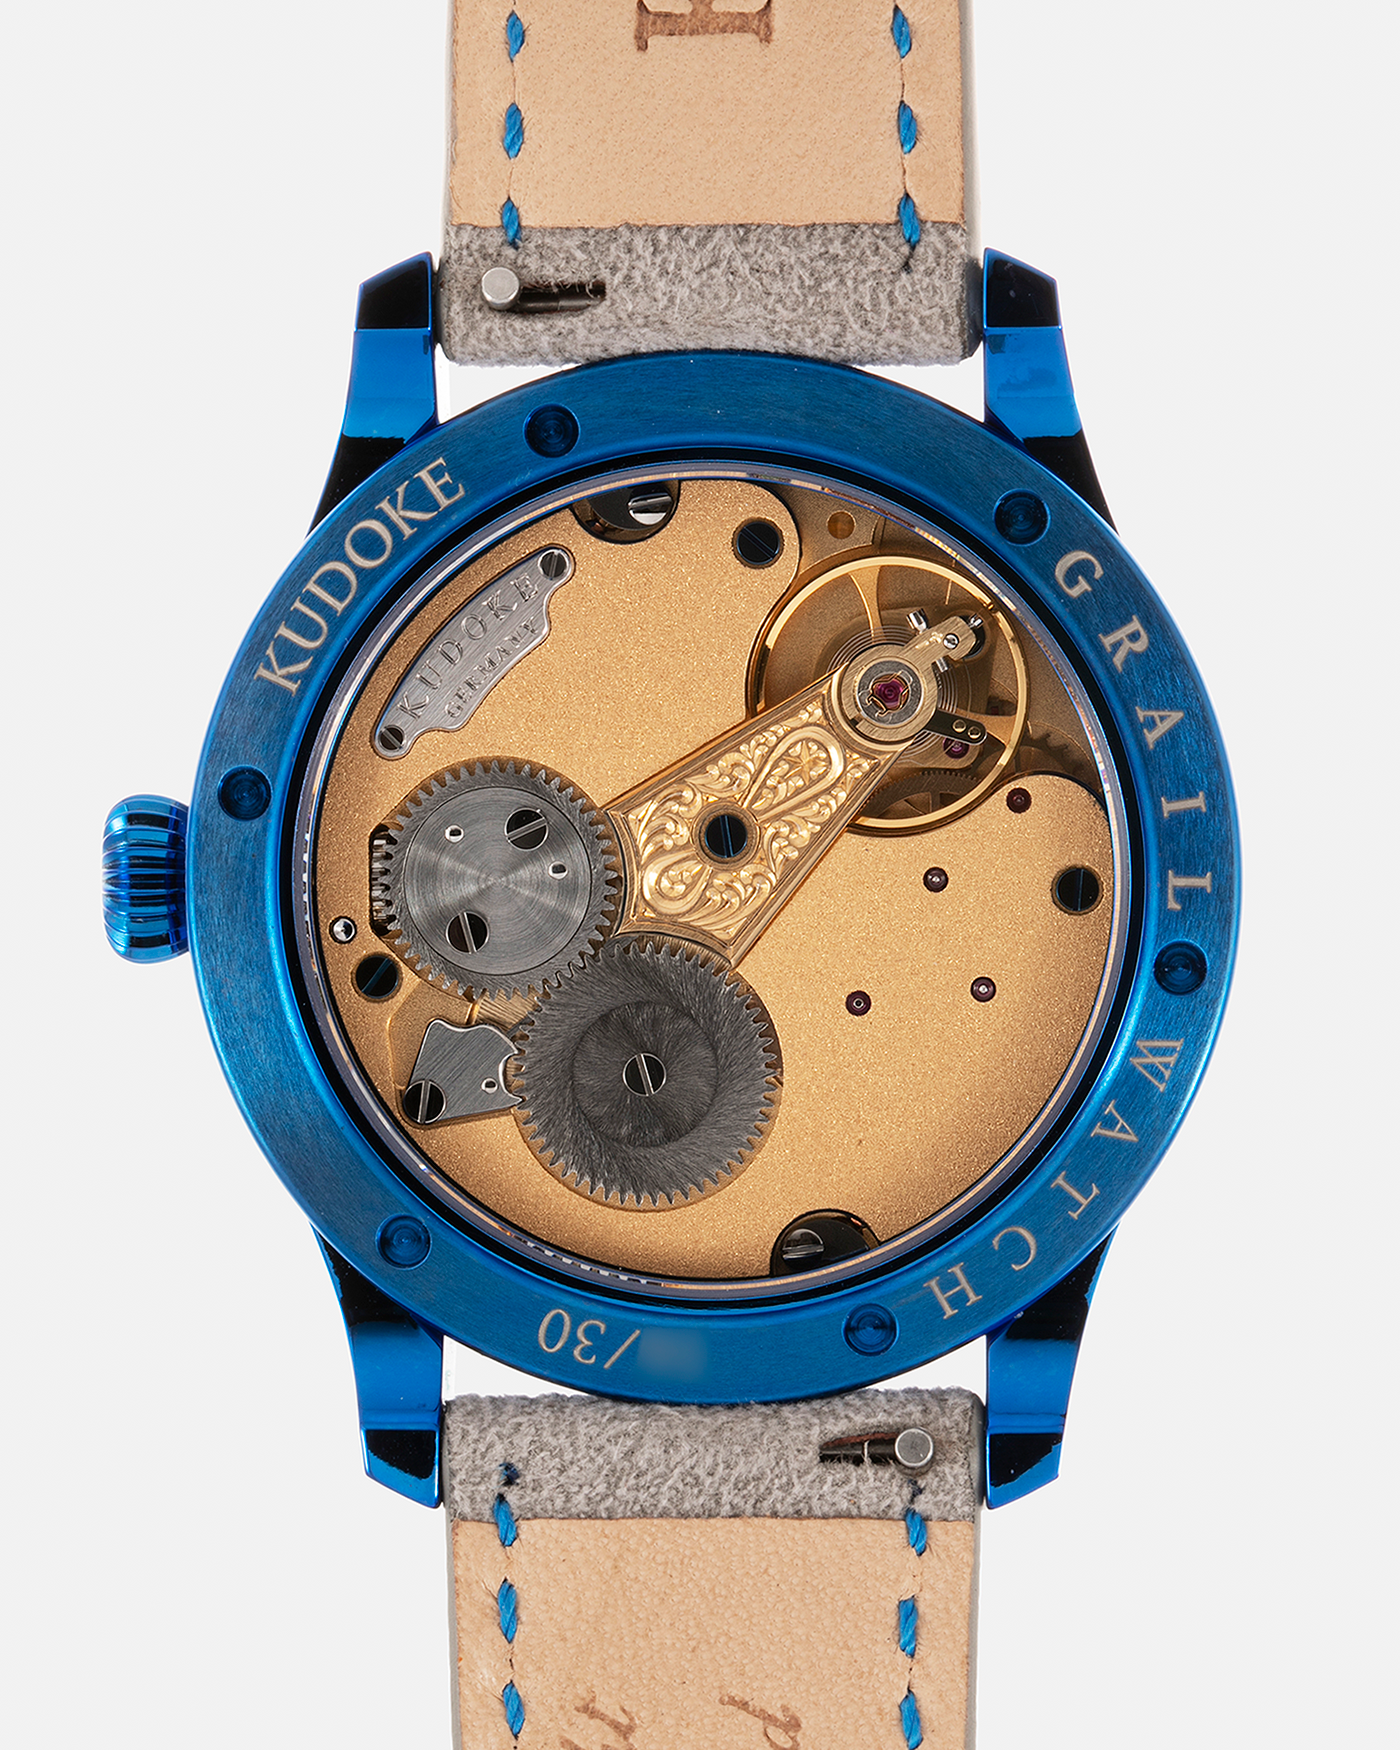 Brand: Kudoke Year: 2022 Model: Kudoke 2 ‘Starry Night’ Grail Watch 8, Limited Edition of 30 pieces Material: Grade 5 Titanium with CVD Blue Finish Movement: In-house Kaliber 1-24H, Manual-Winding Case Diameter: 39mm Strap: Grey Alcantara with Bovine Calf Lining and Blue Stitching with Signed CVD Blue Grade 5 Titanium Tang Buckle, Additional Delugs Navy CTS Rubber Strap, and Delugs Denim Bable Signature Strap